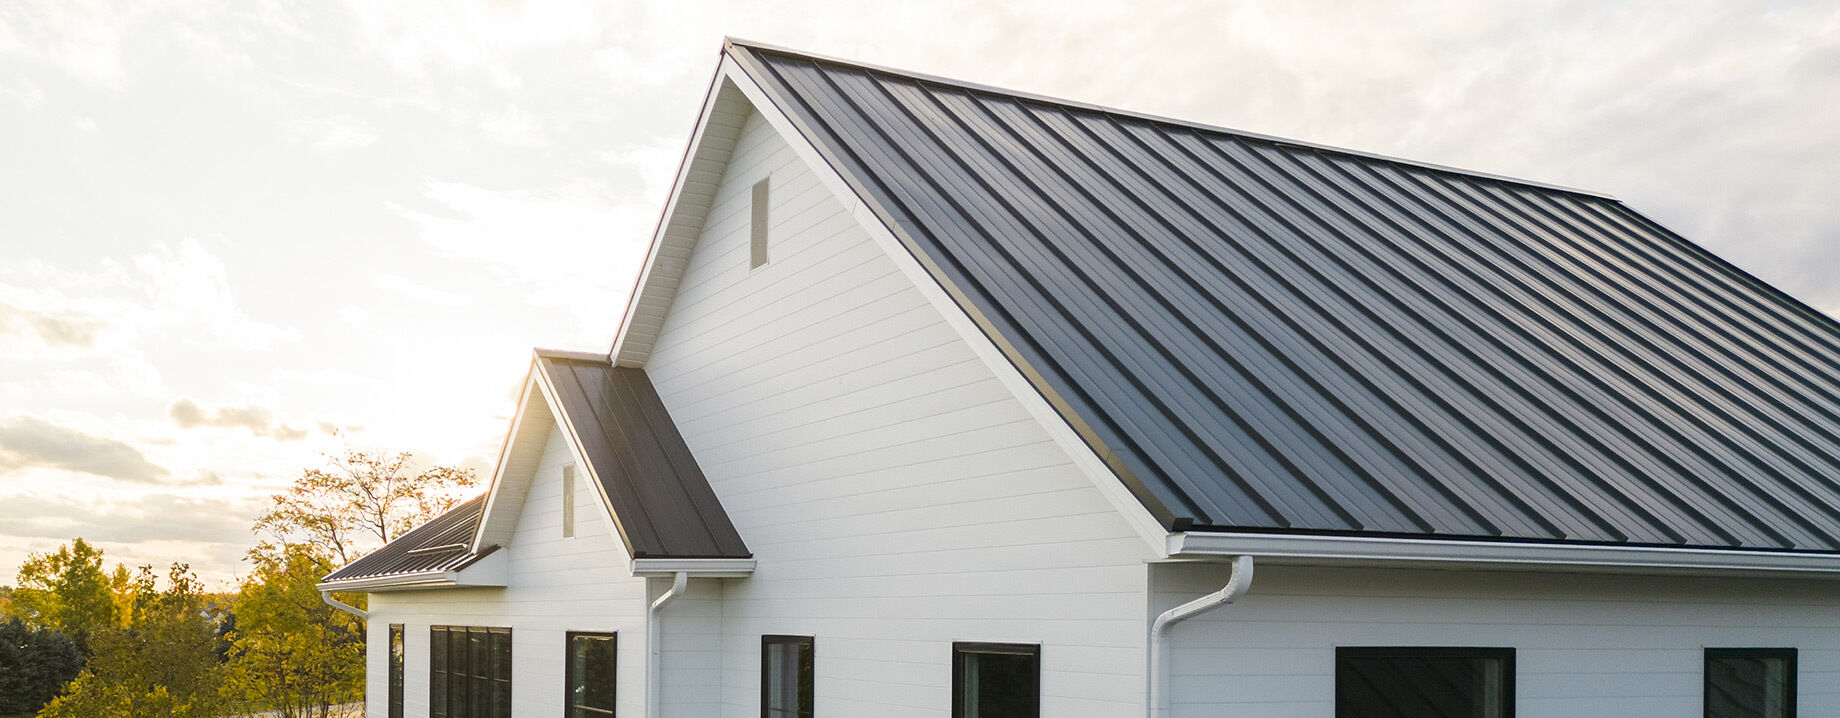 The Changing Trends in Drip Edge and Fascia: Exploring Roof Trim Evolution